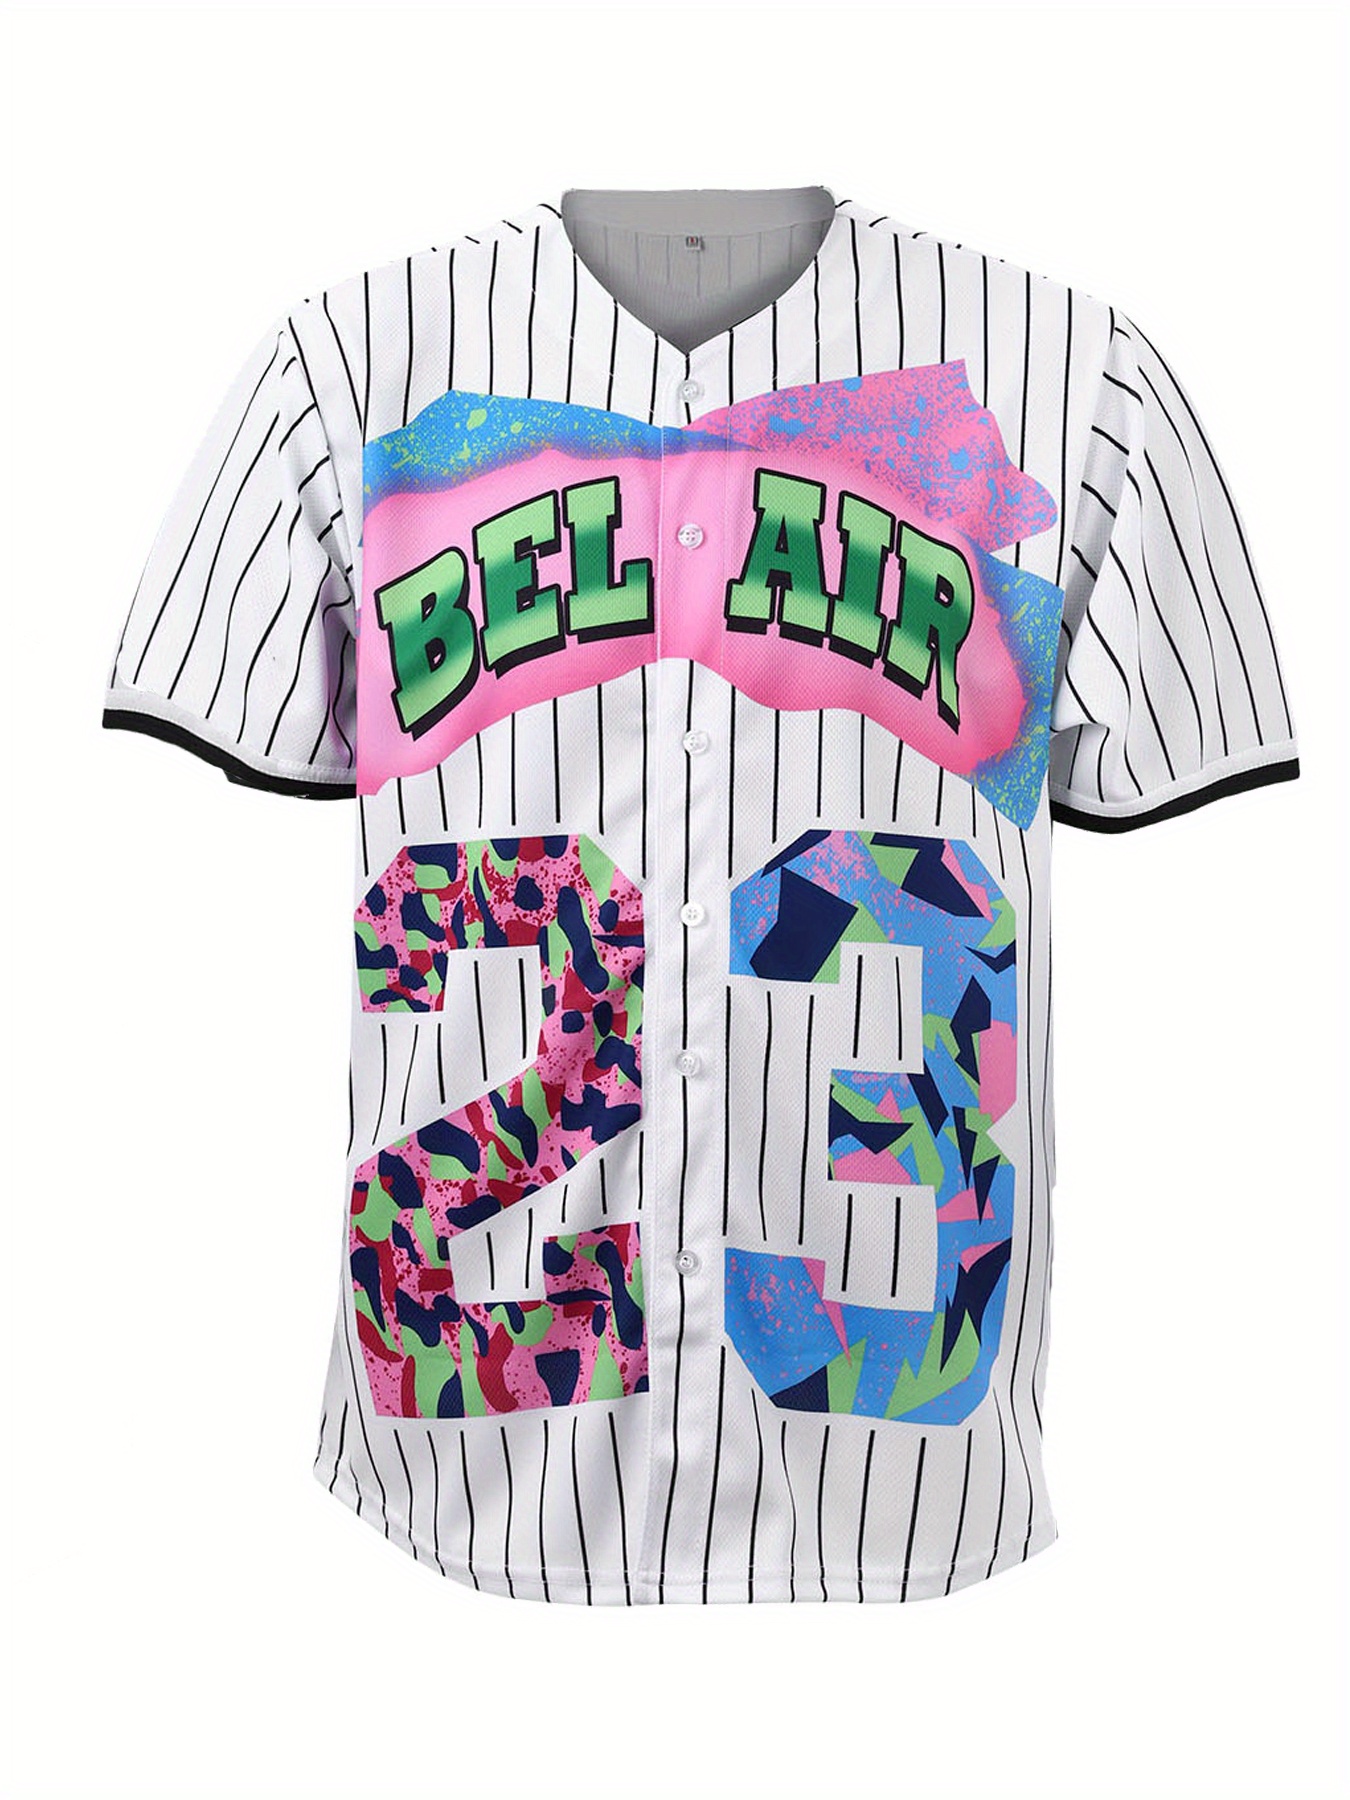 Mens Bel Air 23 Baseball Jersey 90s City Theme Party Clothing Hip